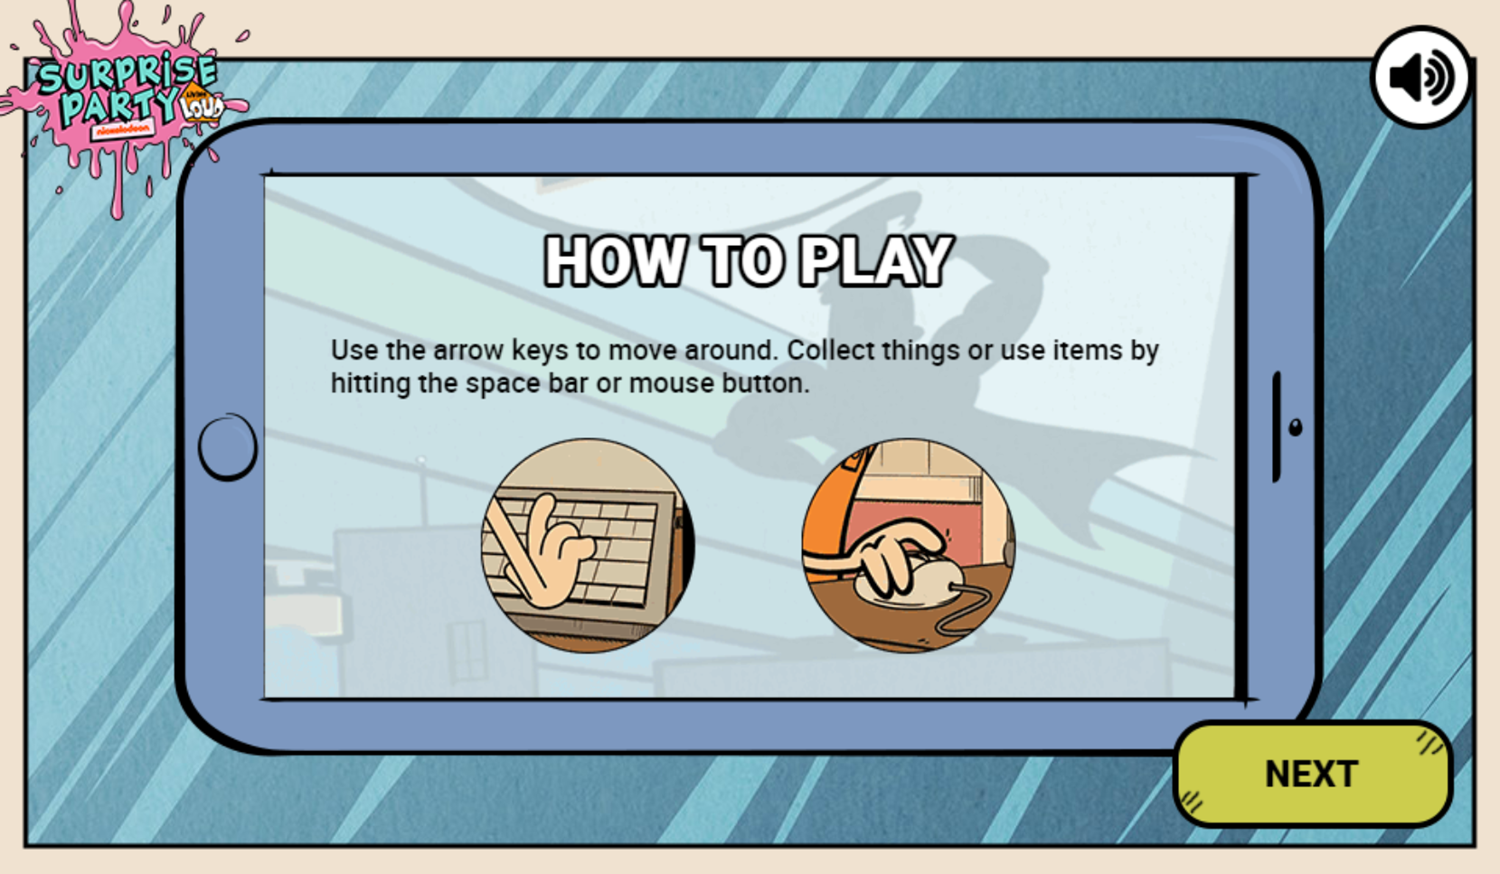 Loud House Surprise Party Game How To Play Screenshot.